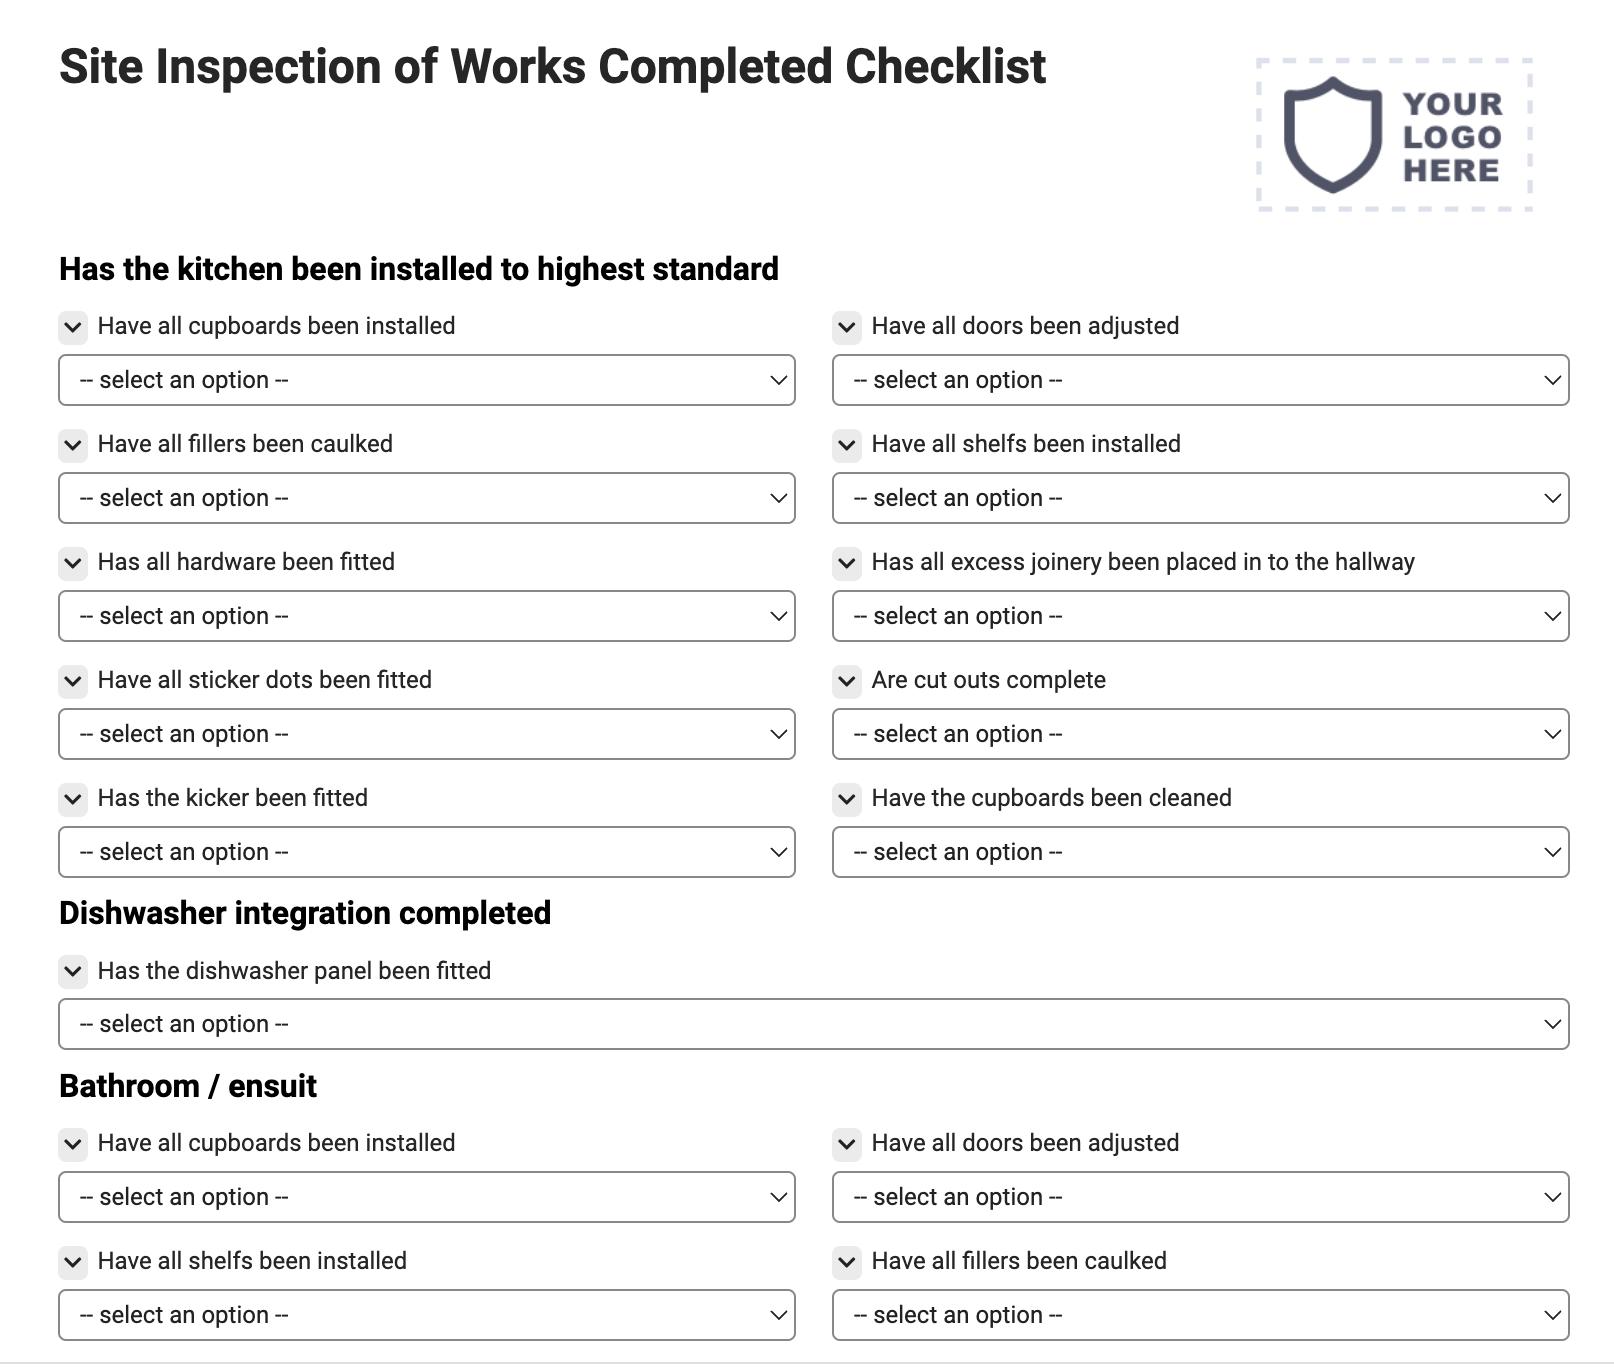 Site Inspection of Works Completed Checklist